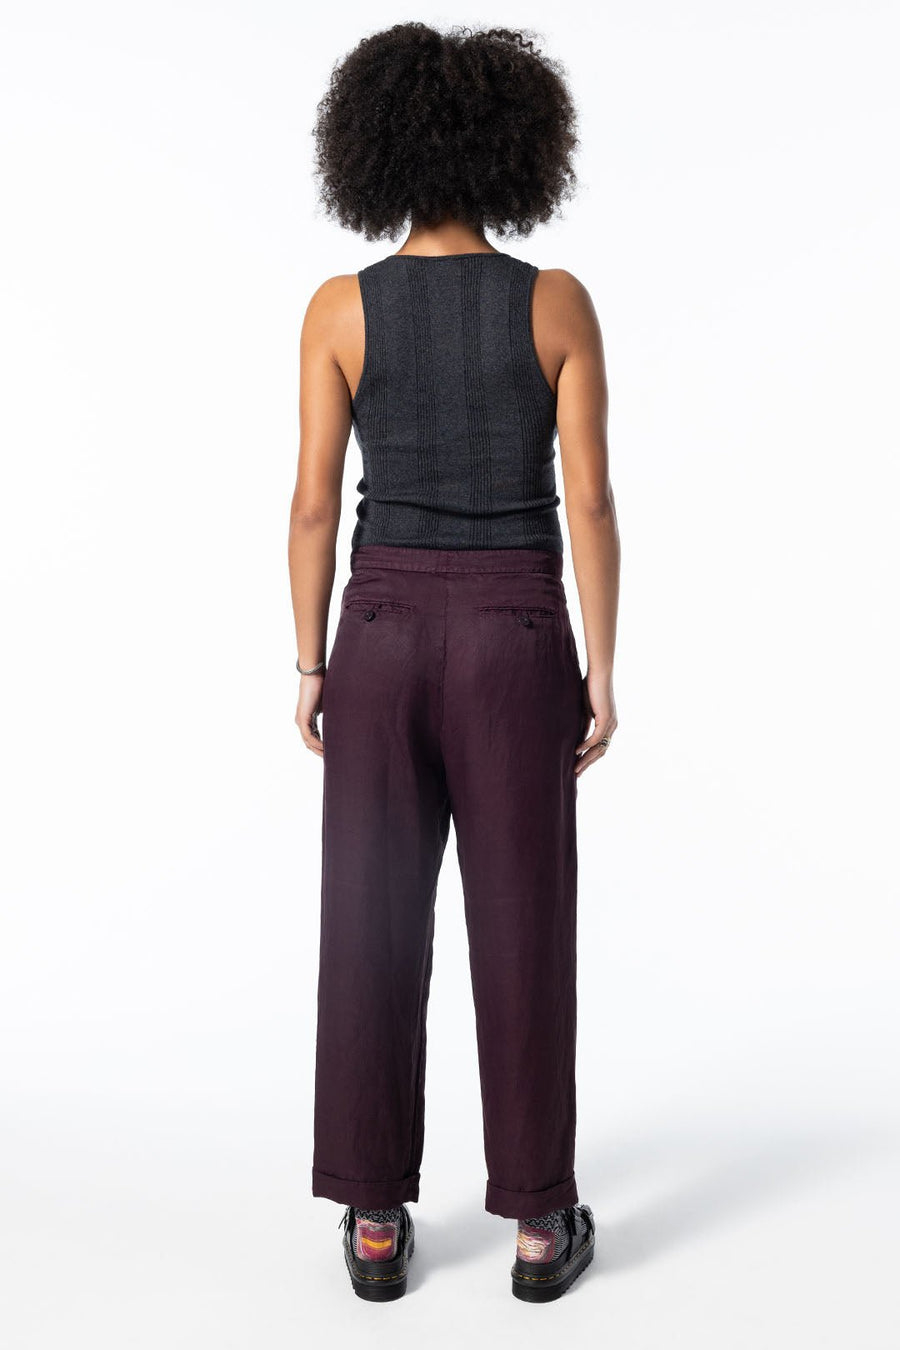 WALLACE TROUSERS, PRUNE - Burning Torch Online Boutique